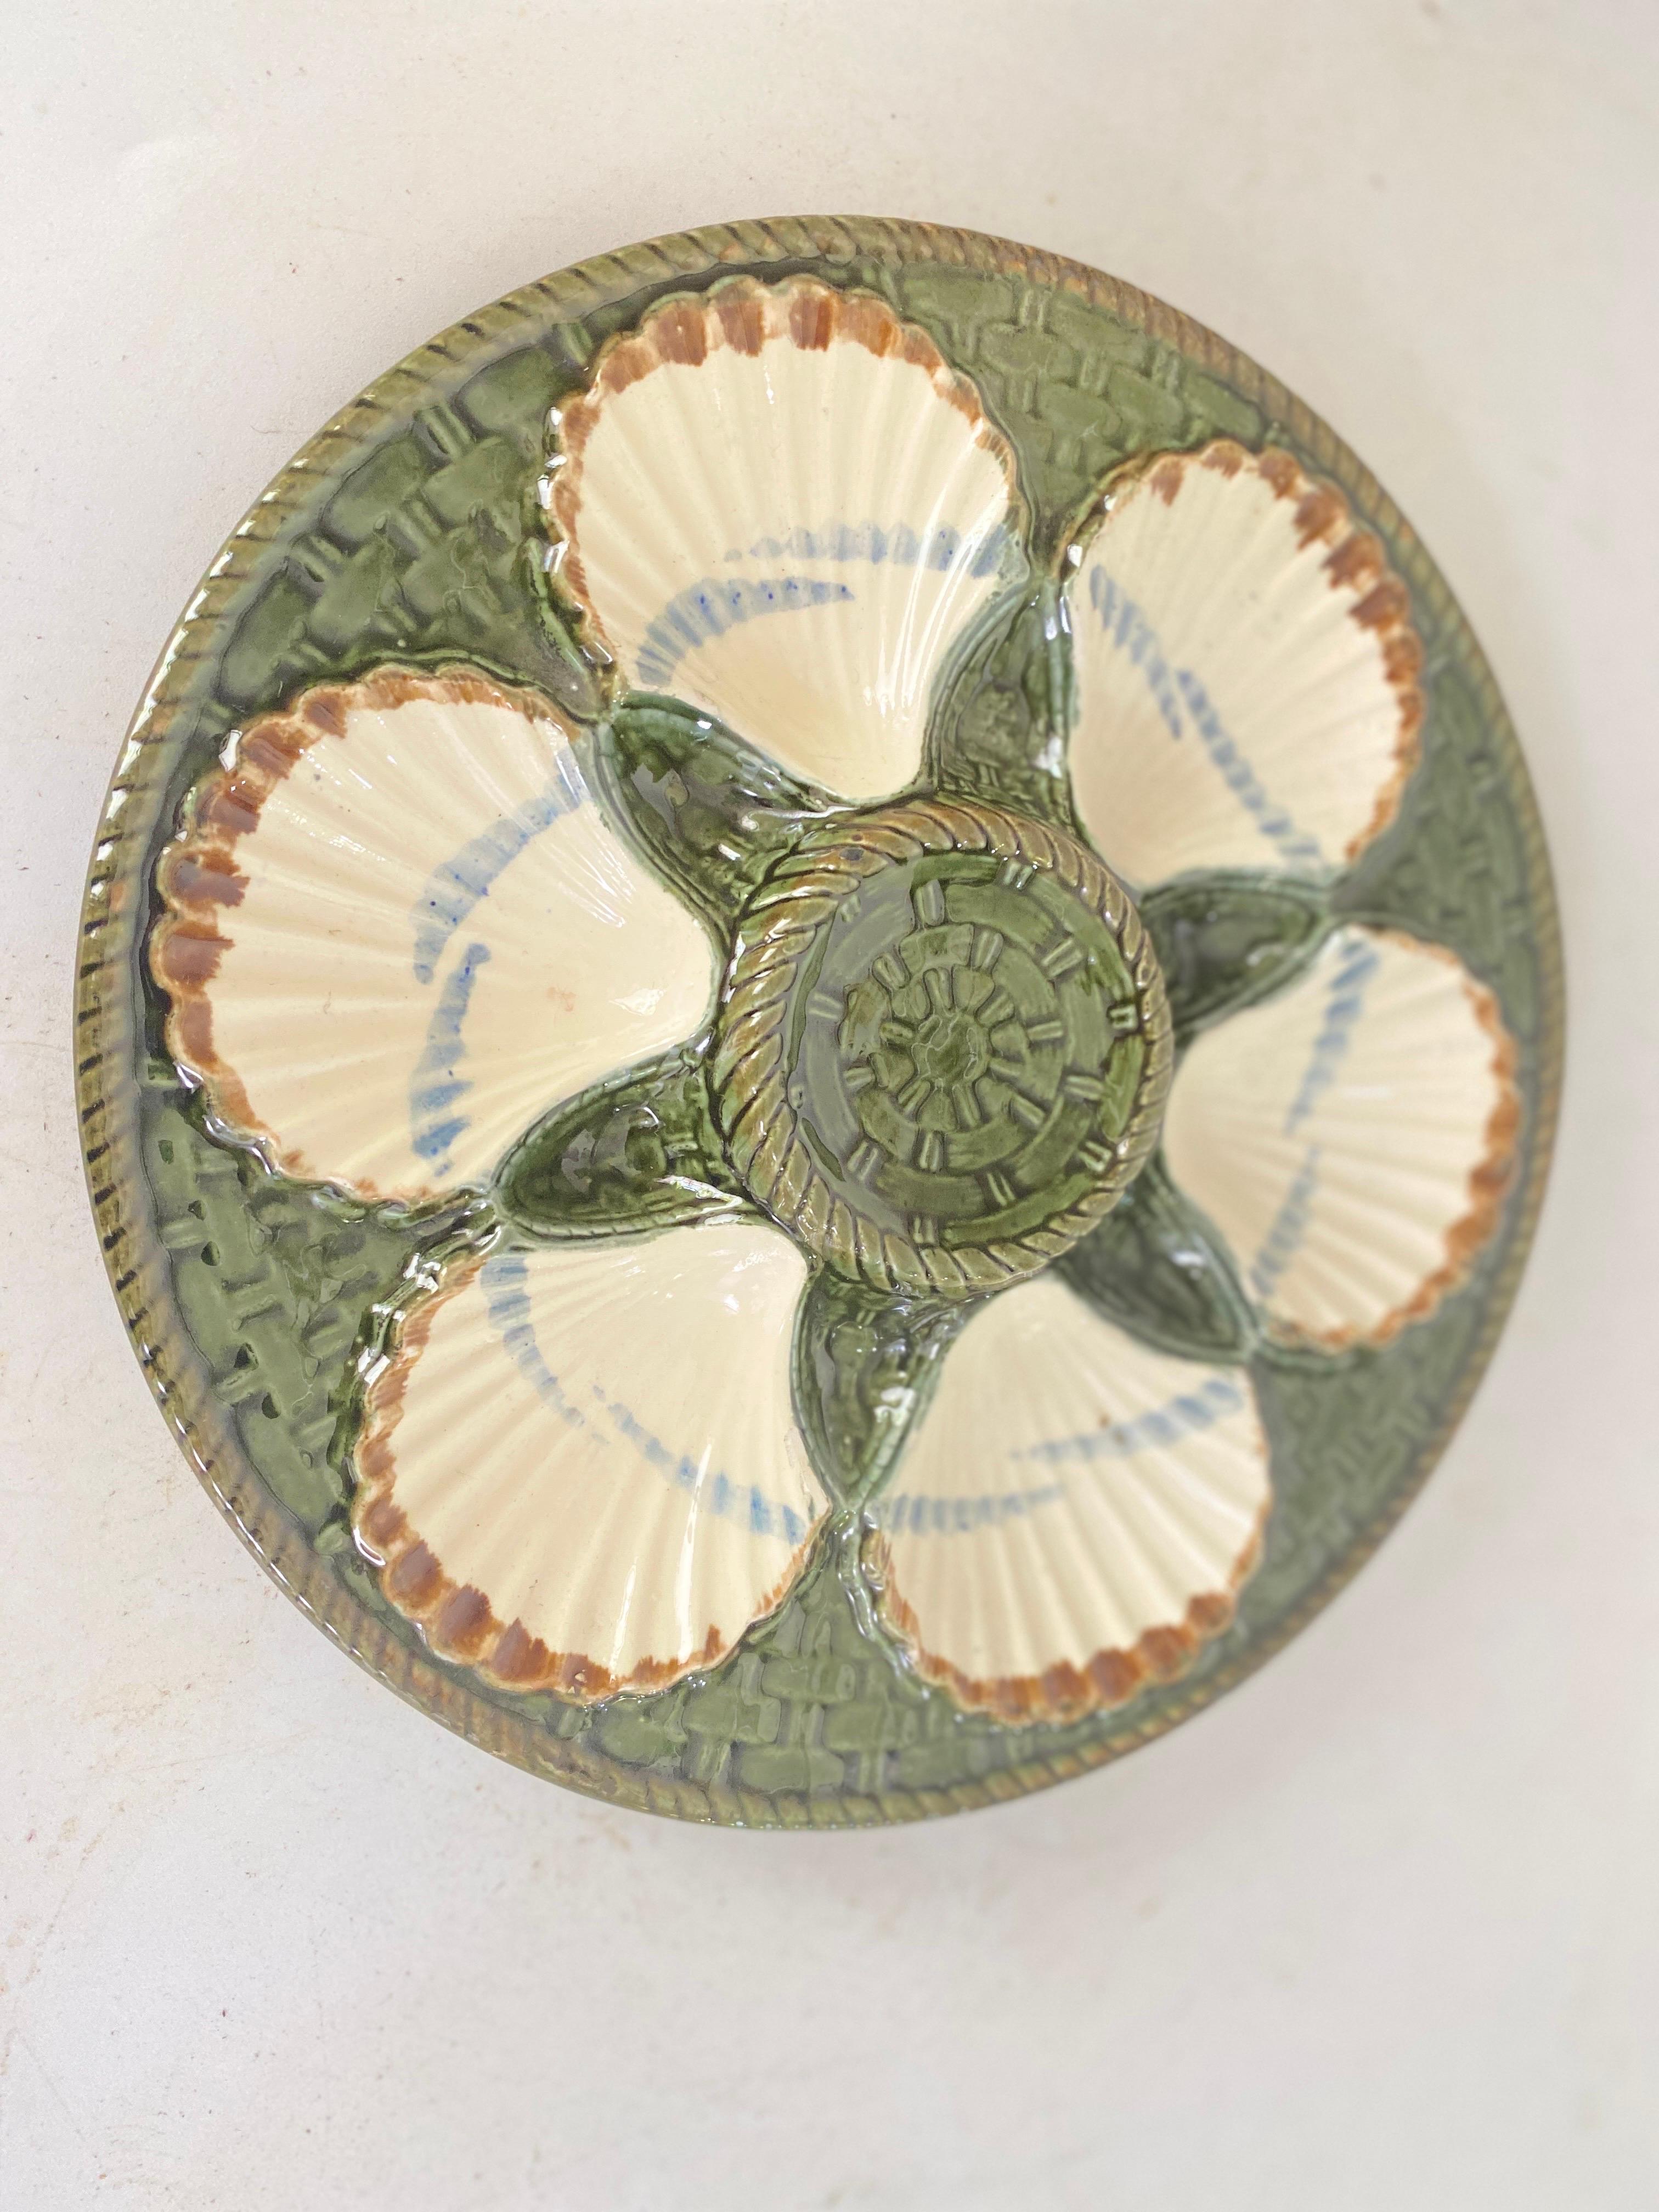 Oyster Plate in Majolica Green and White Color 19th Century Longchamp France 2